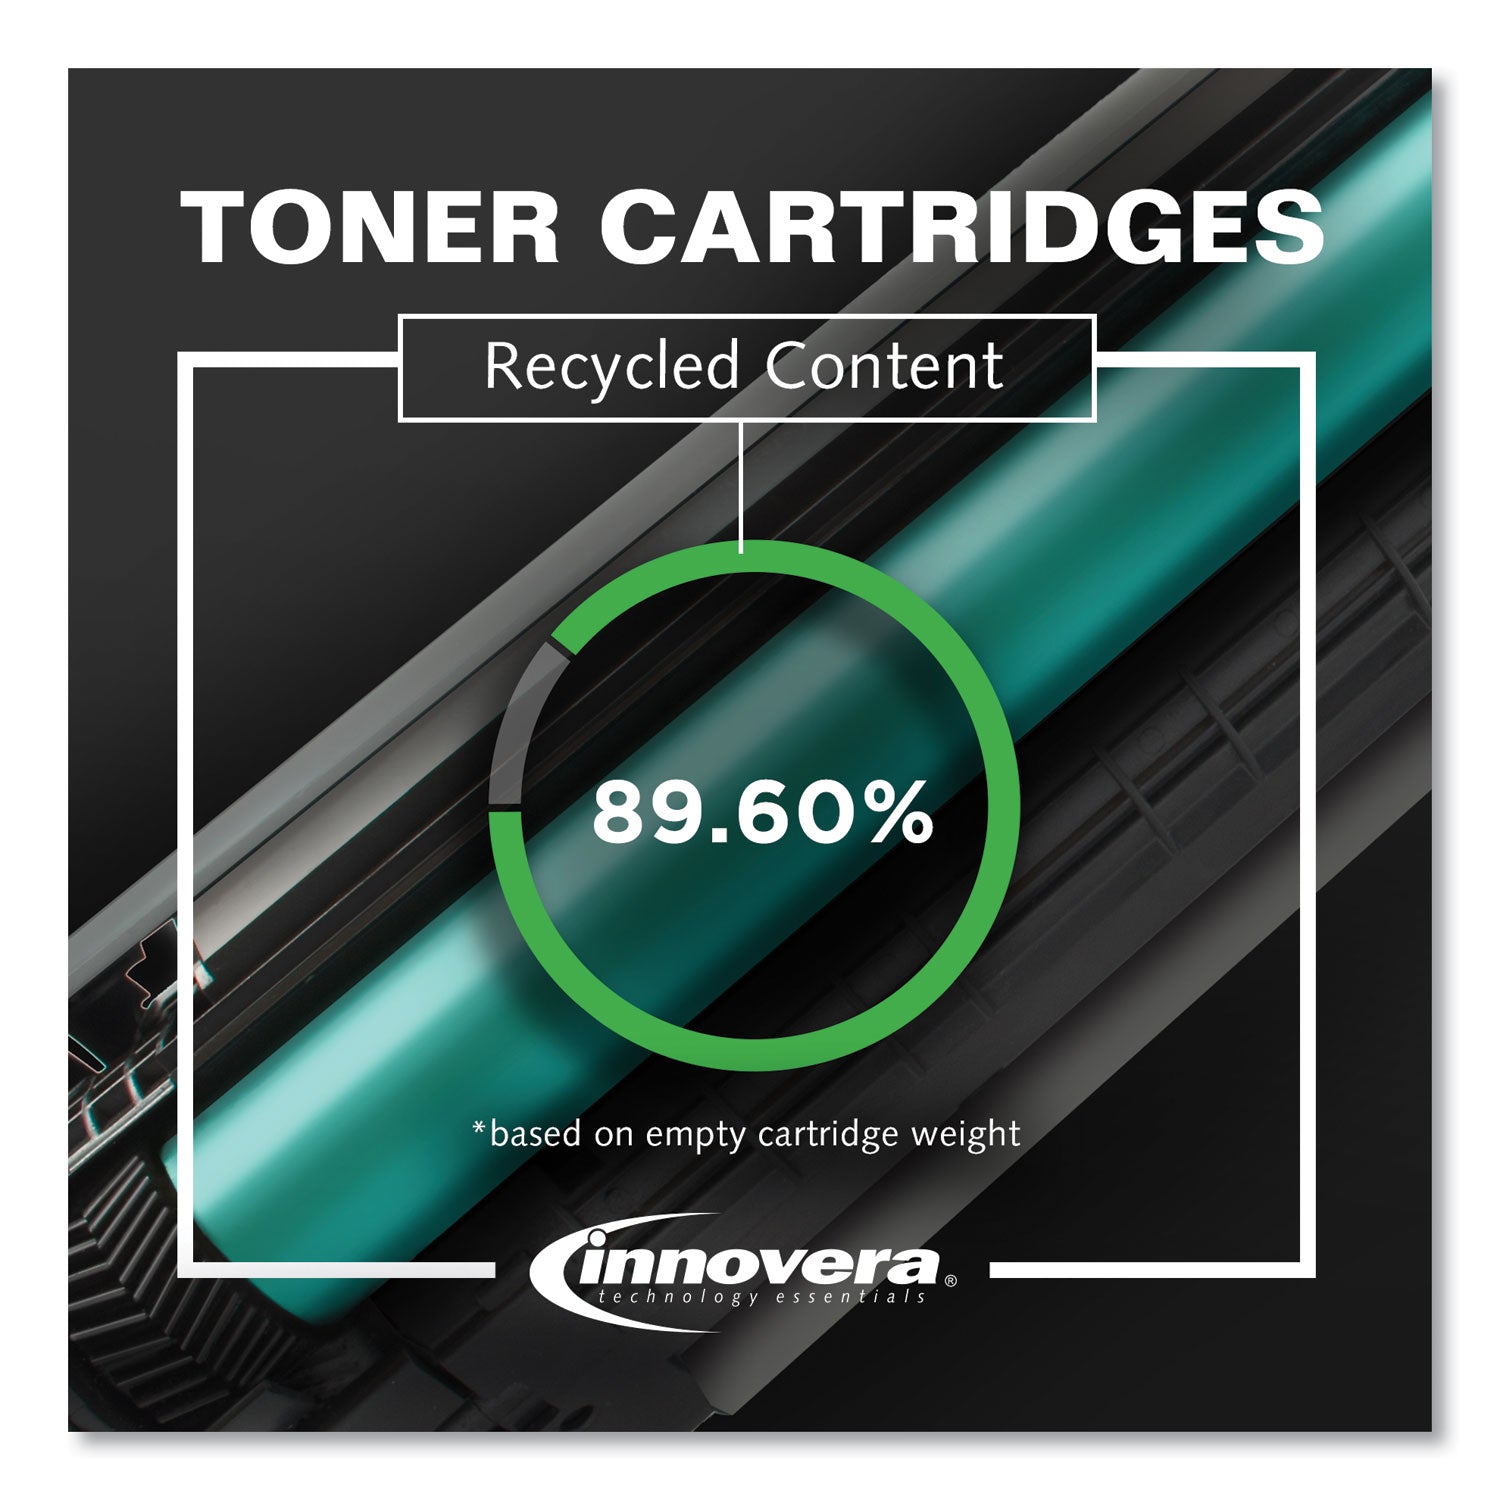 Remanufactured Black Toner, Replacement for 304A (CC530A), 3,500 Page-Yield - 